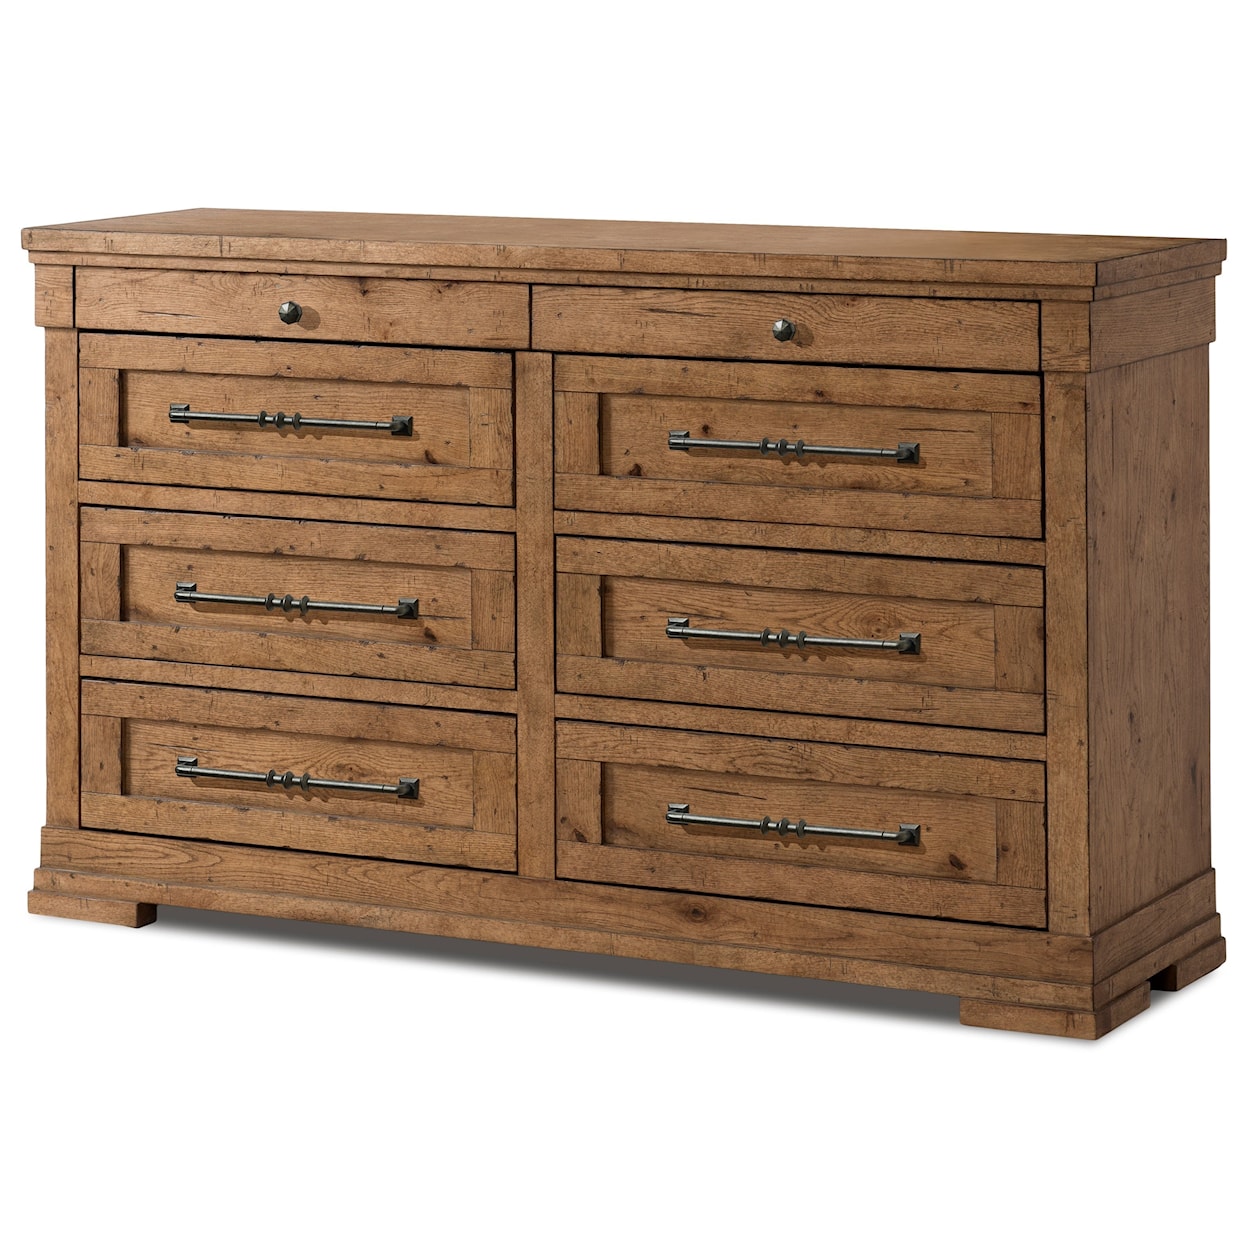 Trisha Yearwood Home Collection by Legacy Classic Coming Home Dresser